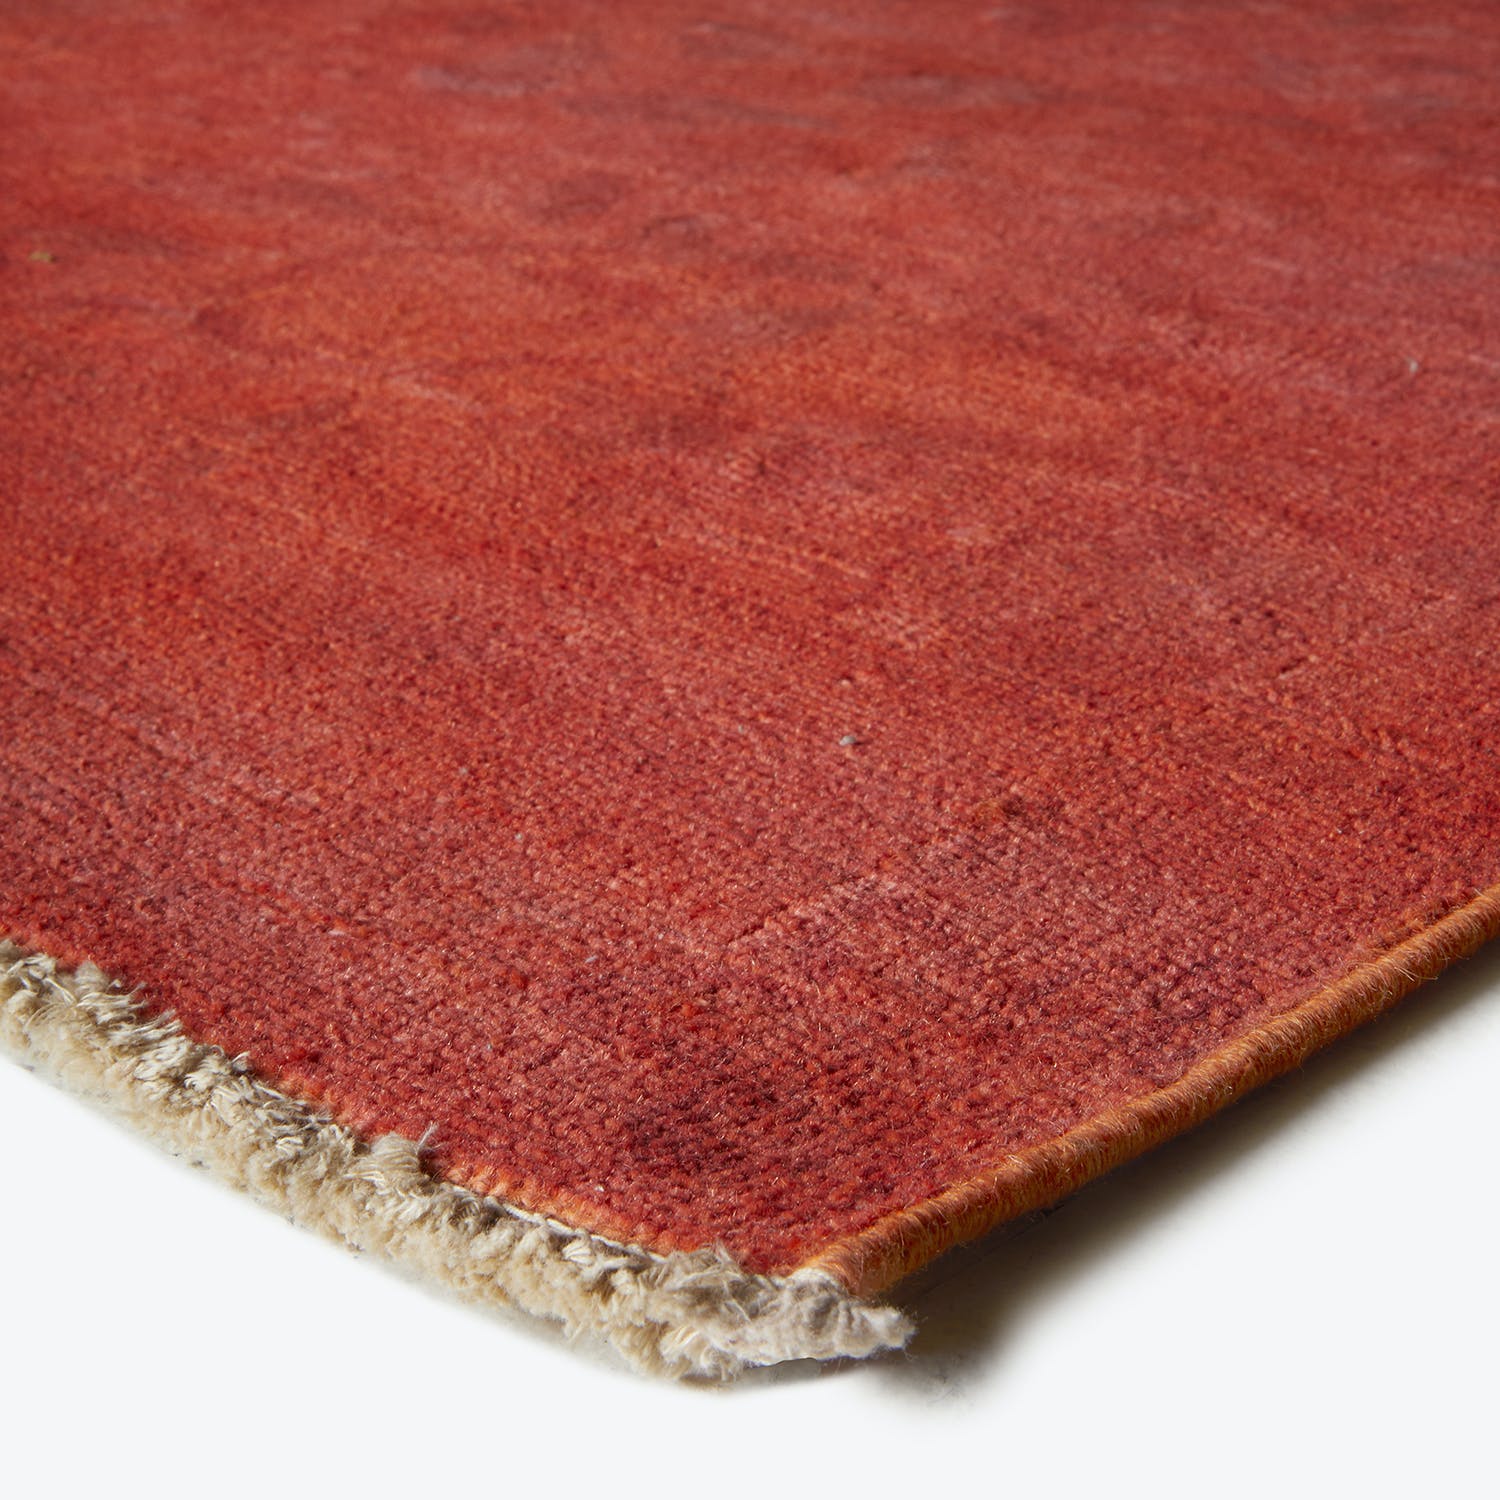 Close-up of red carpet with soft texture and frayed edge.